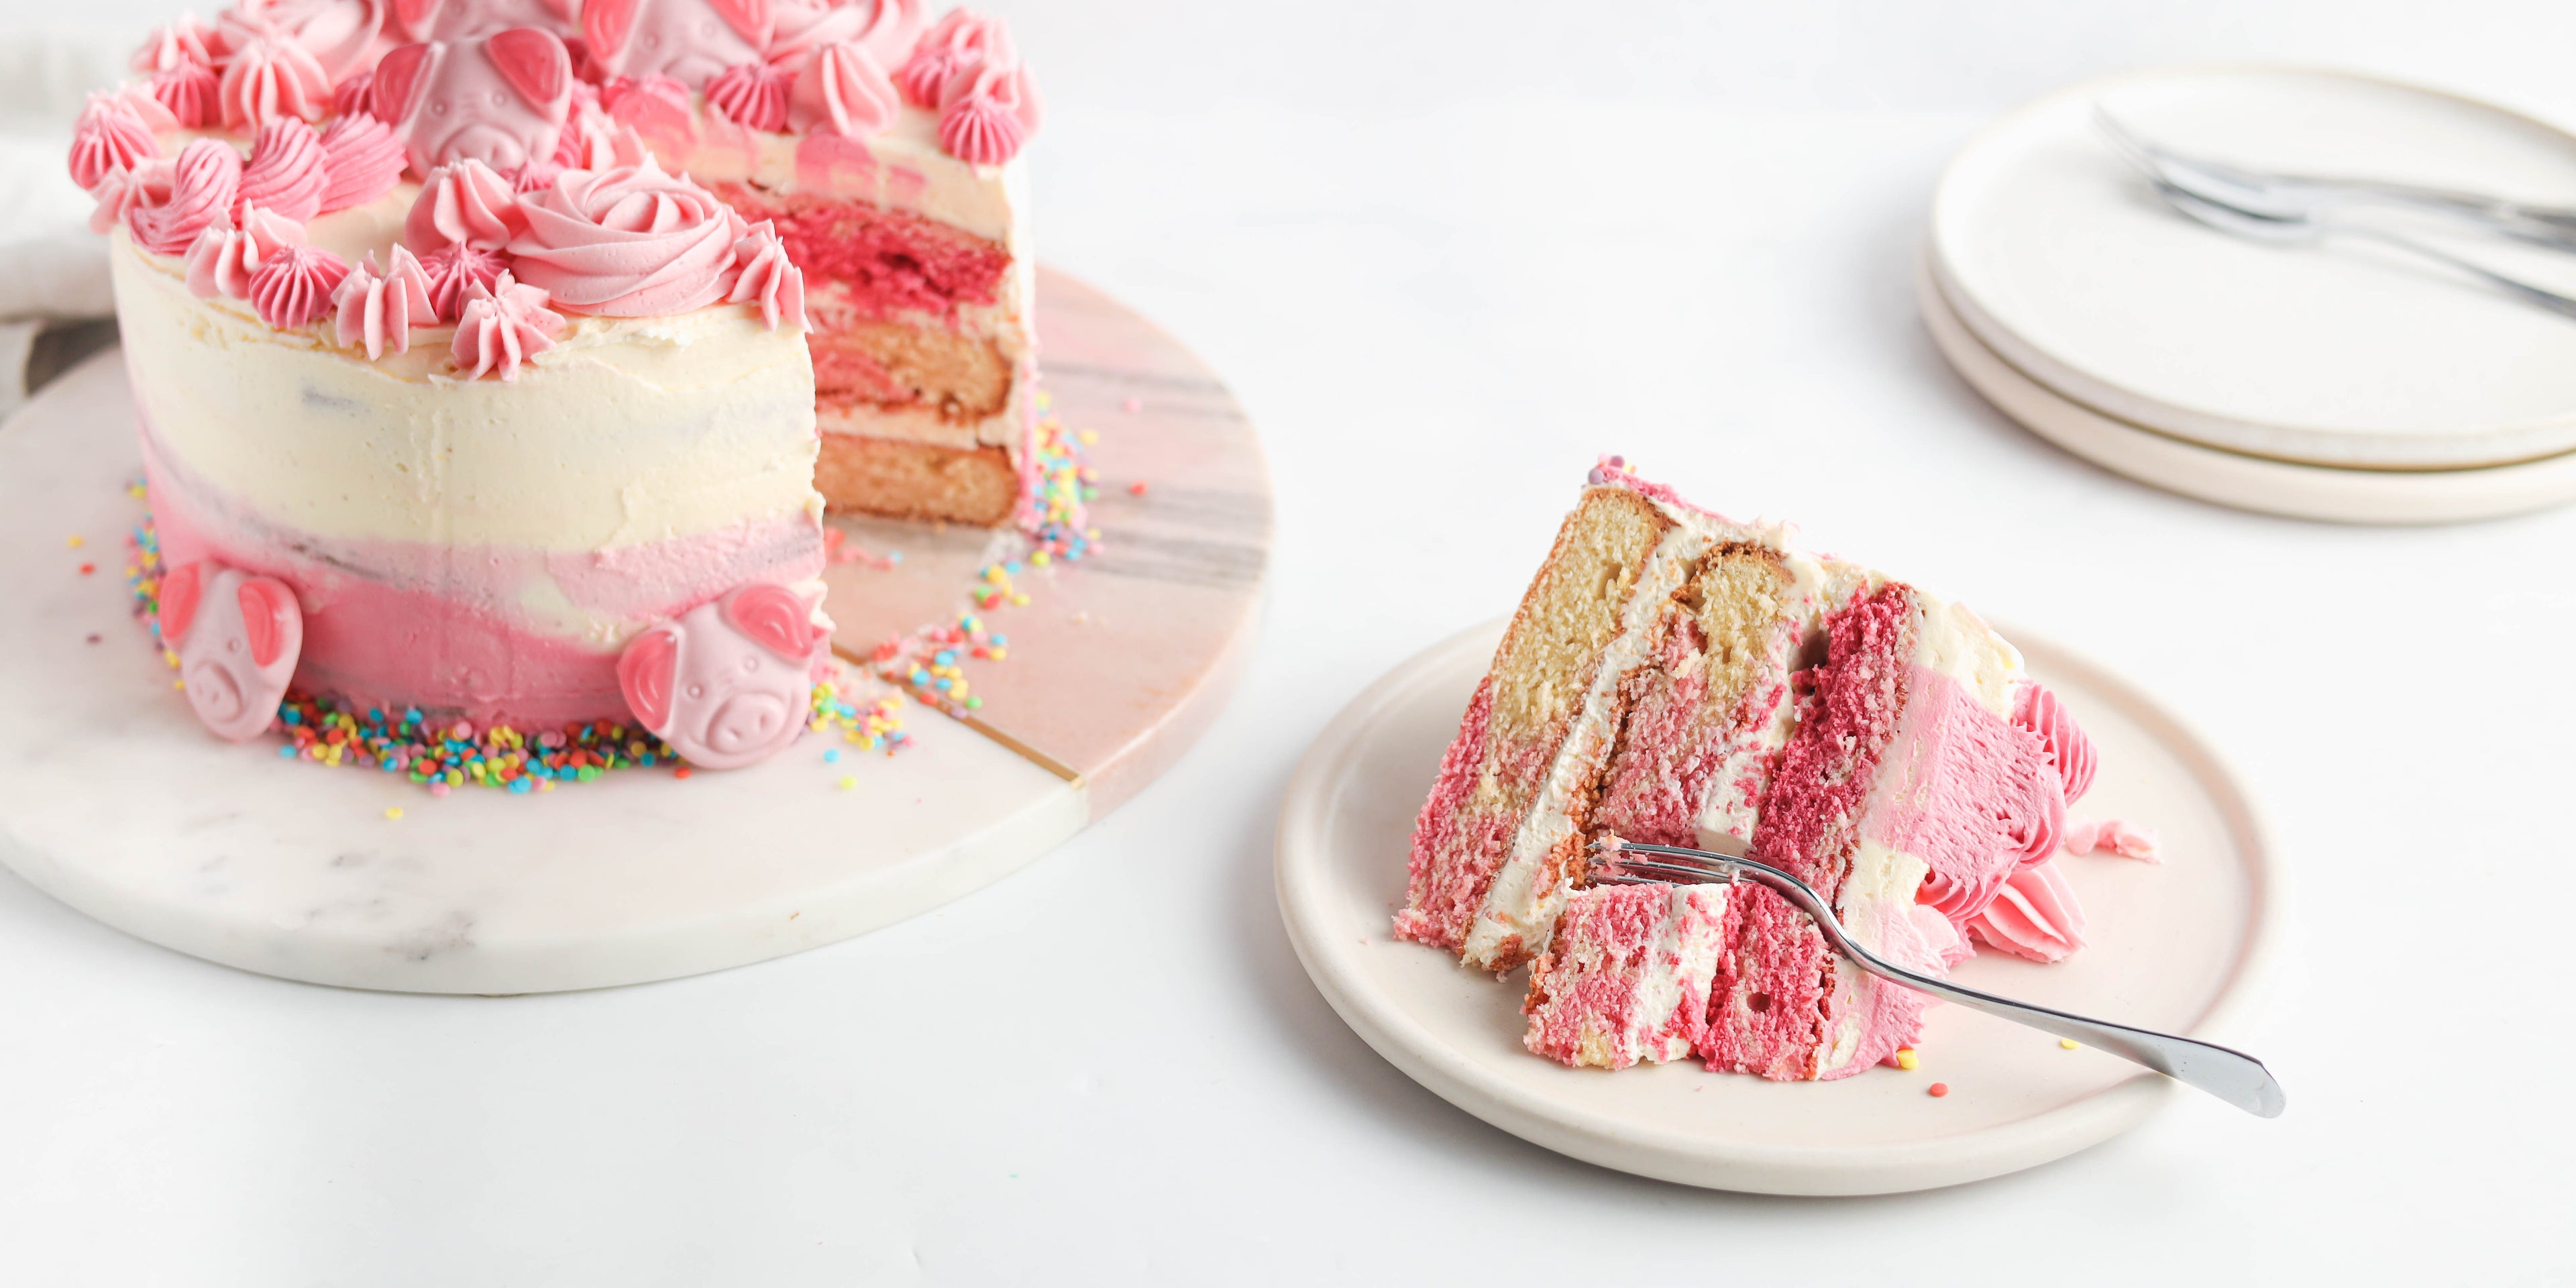 Percy Pig Marble Cake with a slice cut out showing pink ombre layers, decorated with Percy Pig sweets.